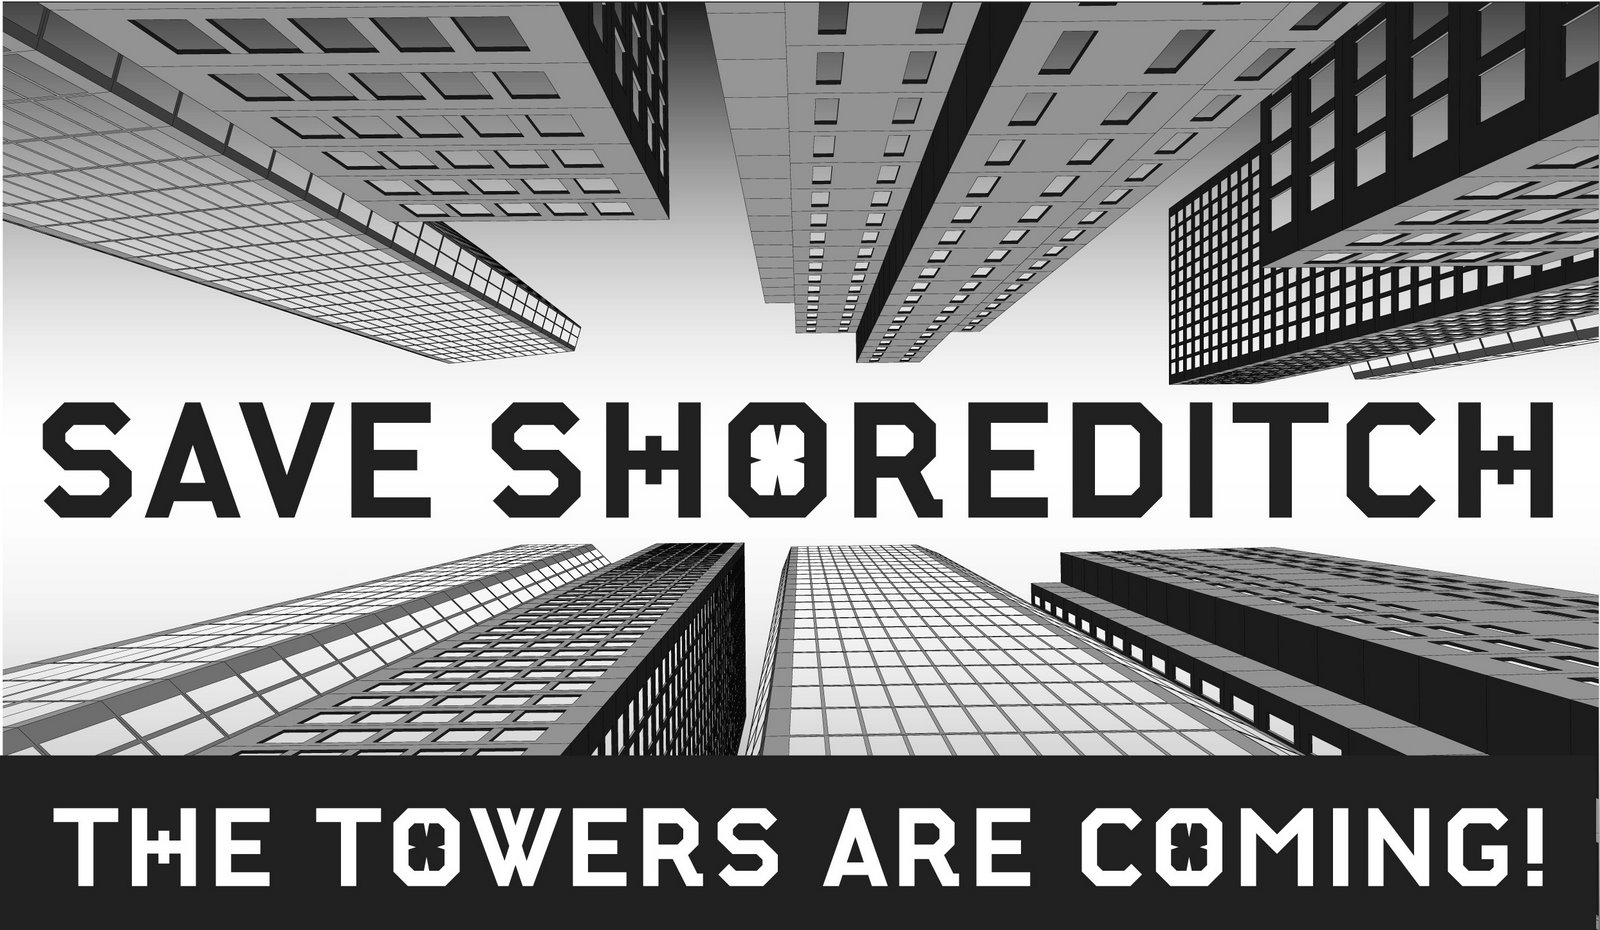 [save+shoreditch+with+tower+big.jpg]